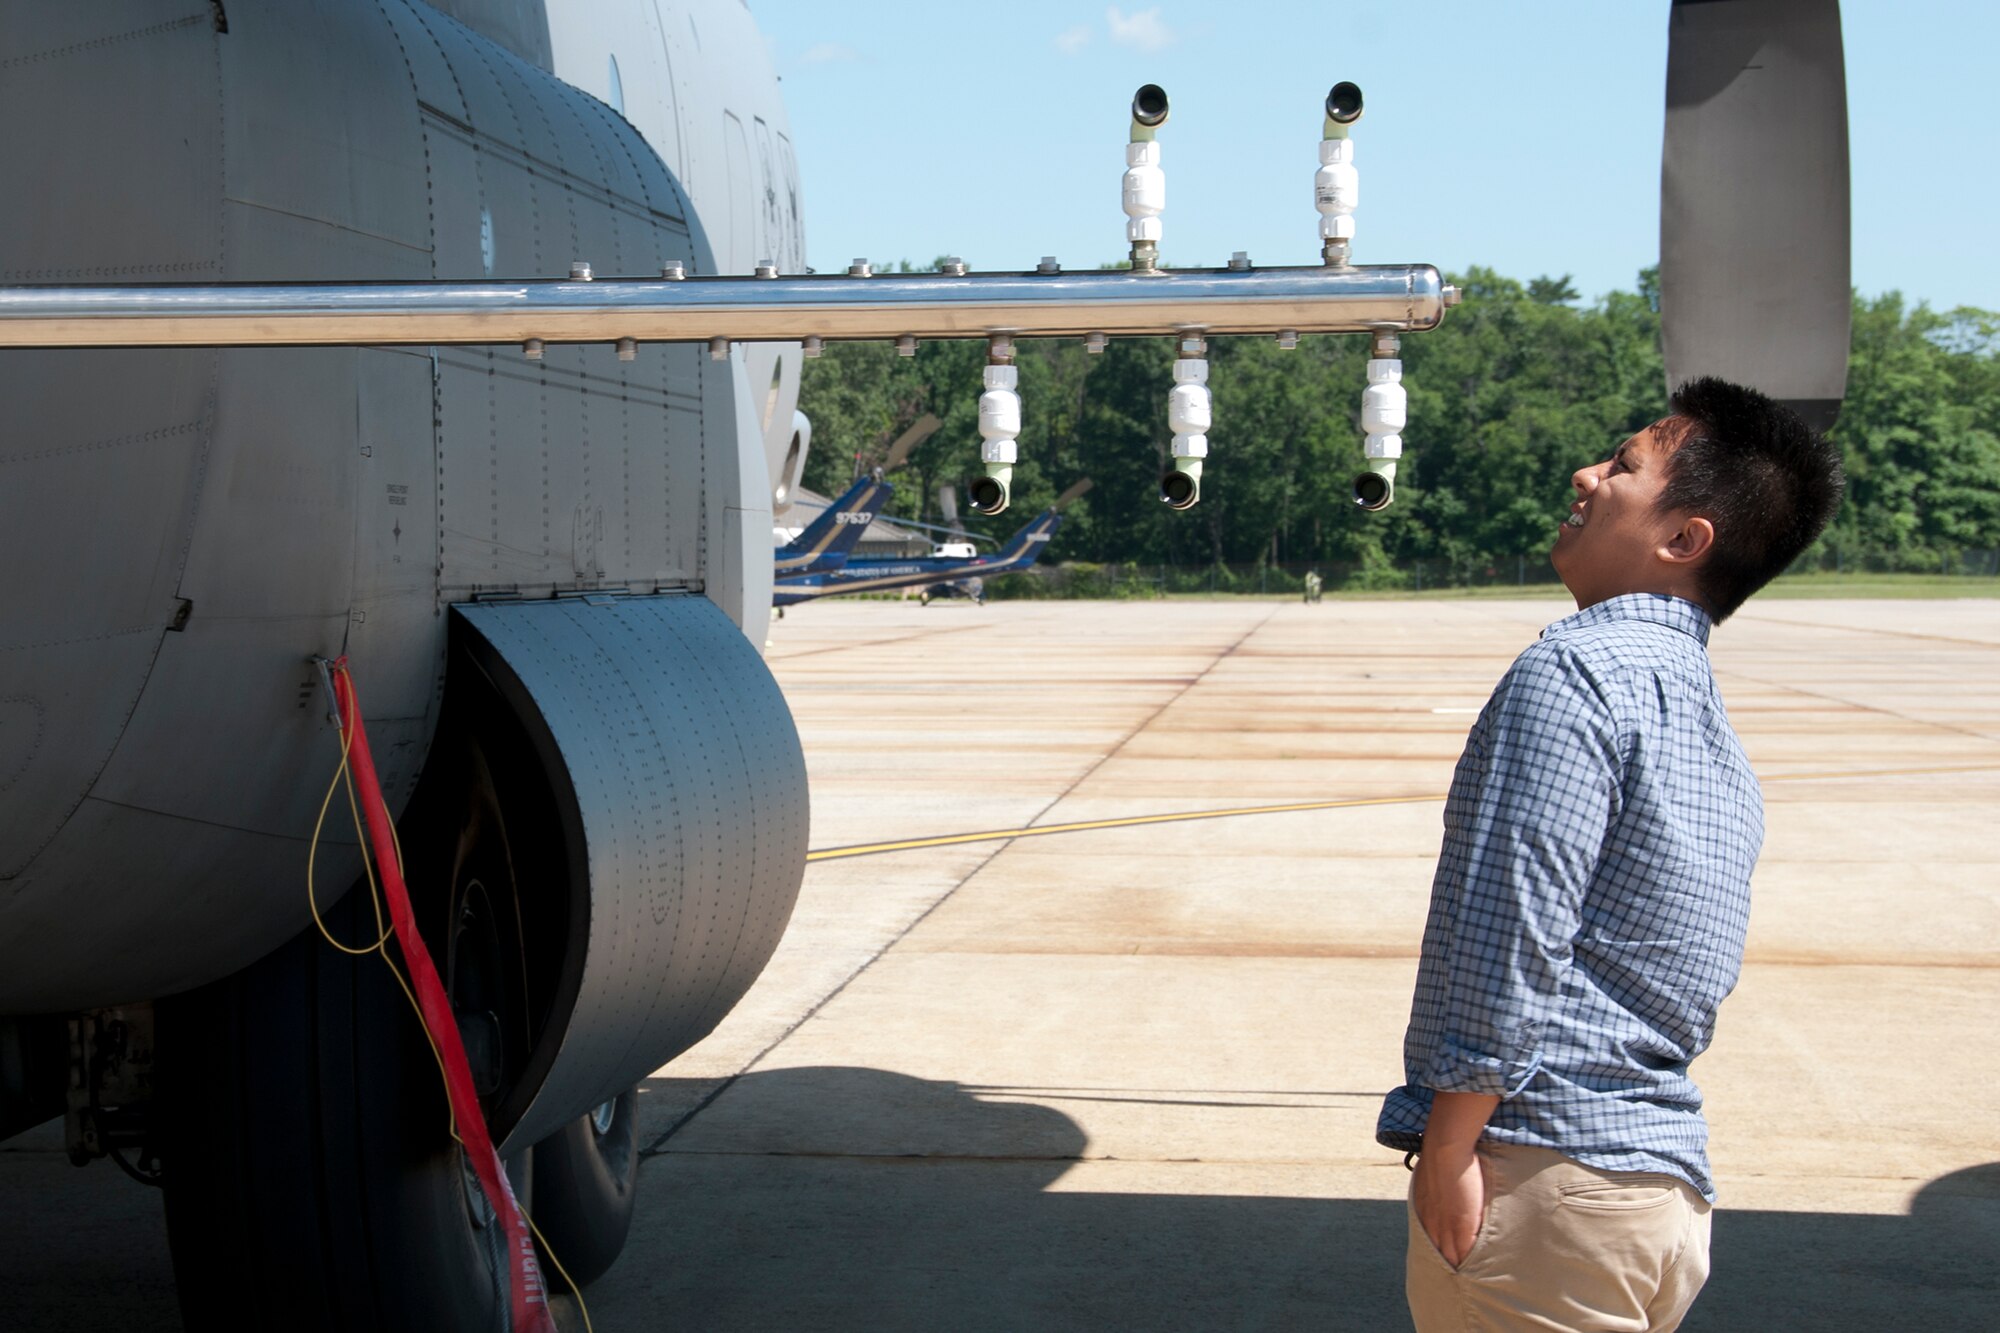 A congressional staff member examines the spray nozzles on a 757th Airlift Squadron C-130 Hercules on the Joint Base Andrews, Md., flight line June 29, 2016. In honor of the 100th anniversary of air reserve power, members of the 53d WRS visited Andrews to participate in a C-130 Hercules special-missions demonstration. The 757th AS has the specialized mission of aerial spray capability to control disease-carrying insects, pest insects, undesirable vegetation and to disperse oil spills in large bodies of water. (U.S. Air Force photo/Staff Sgt. Kat Justen) 